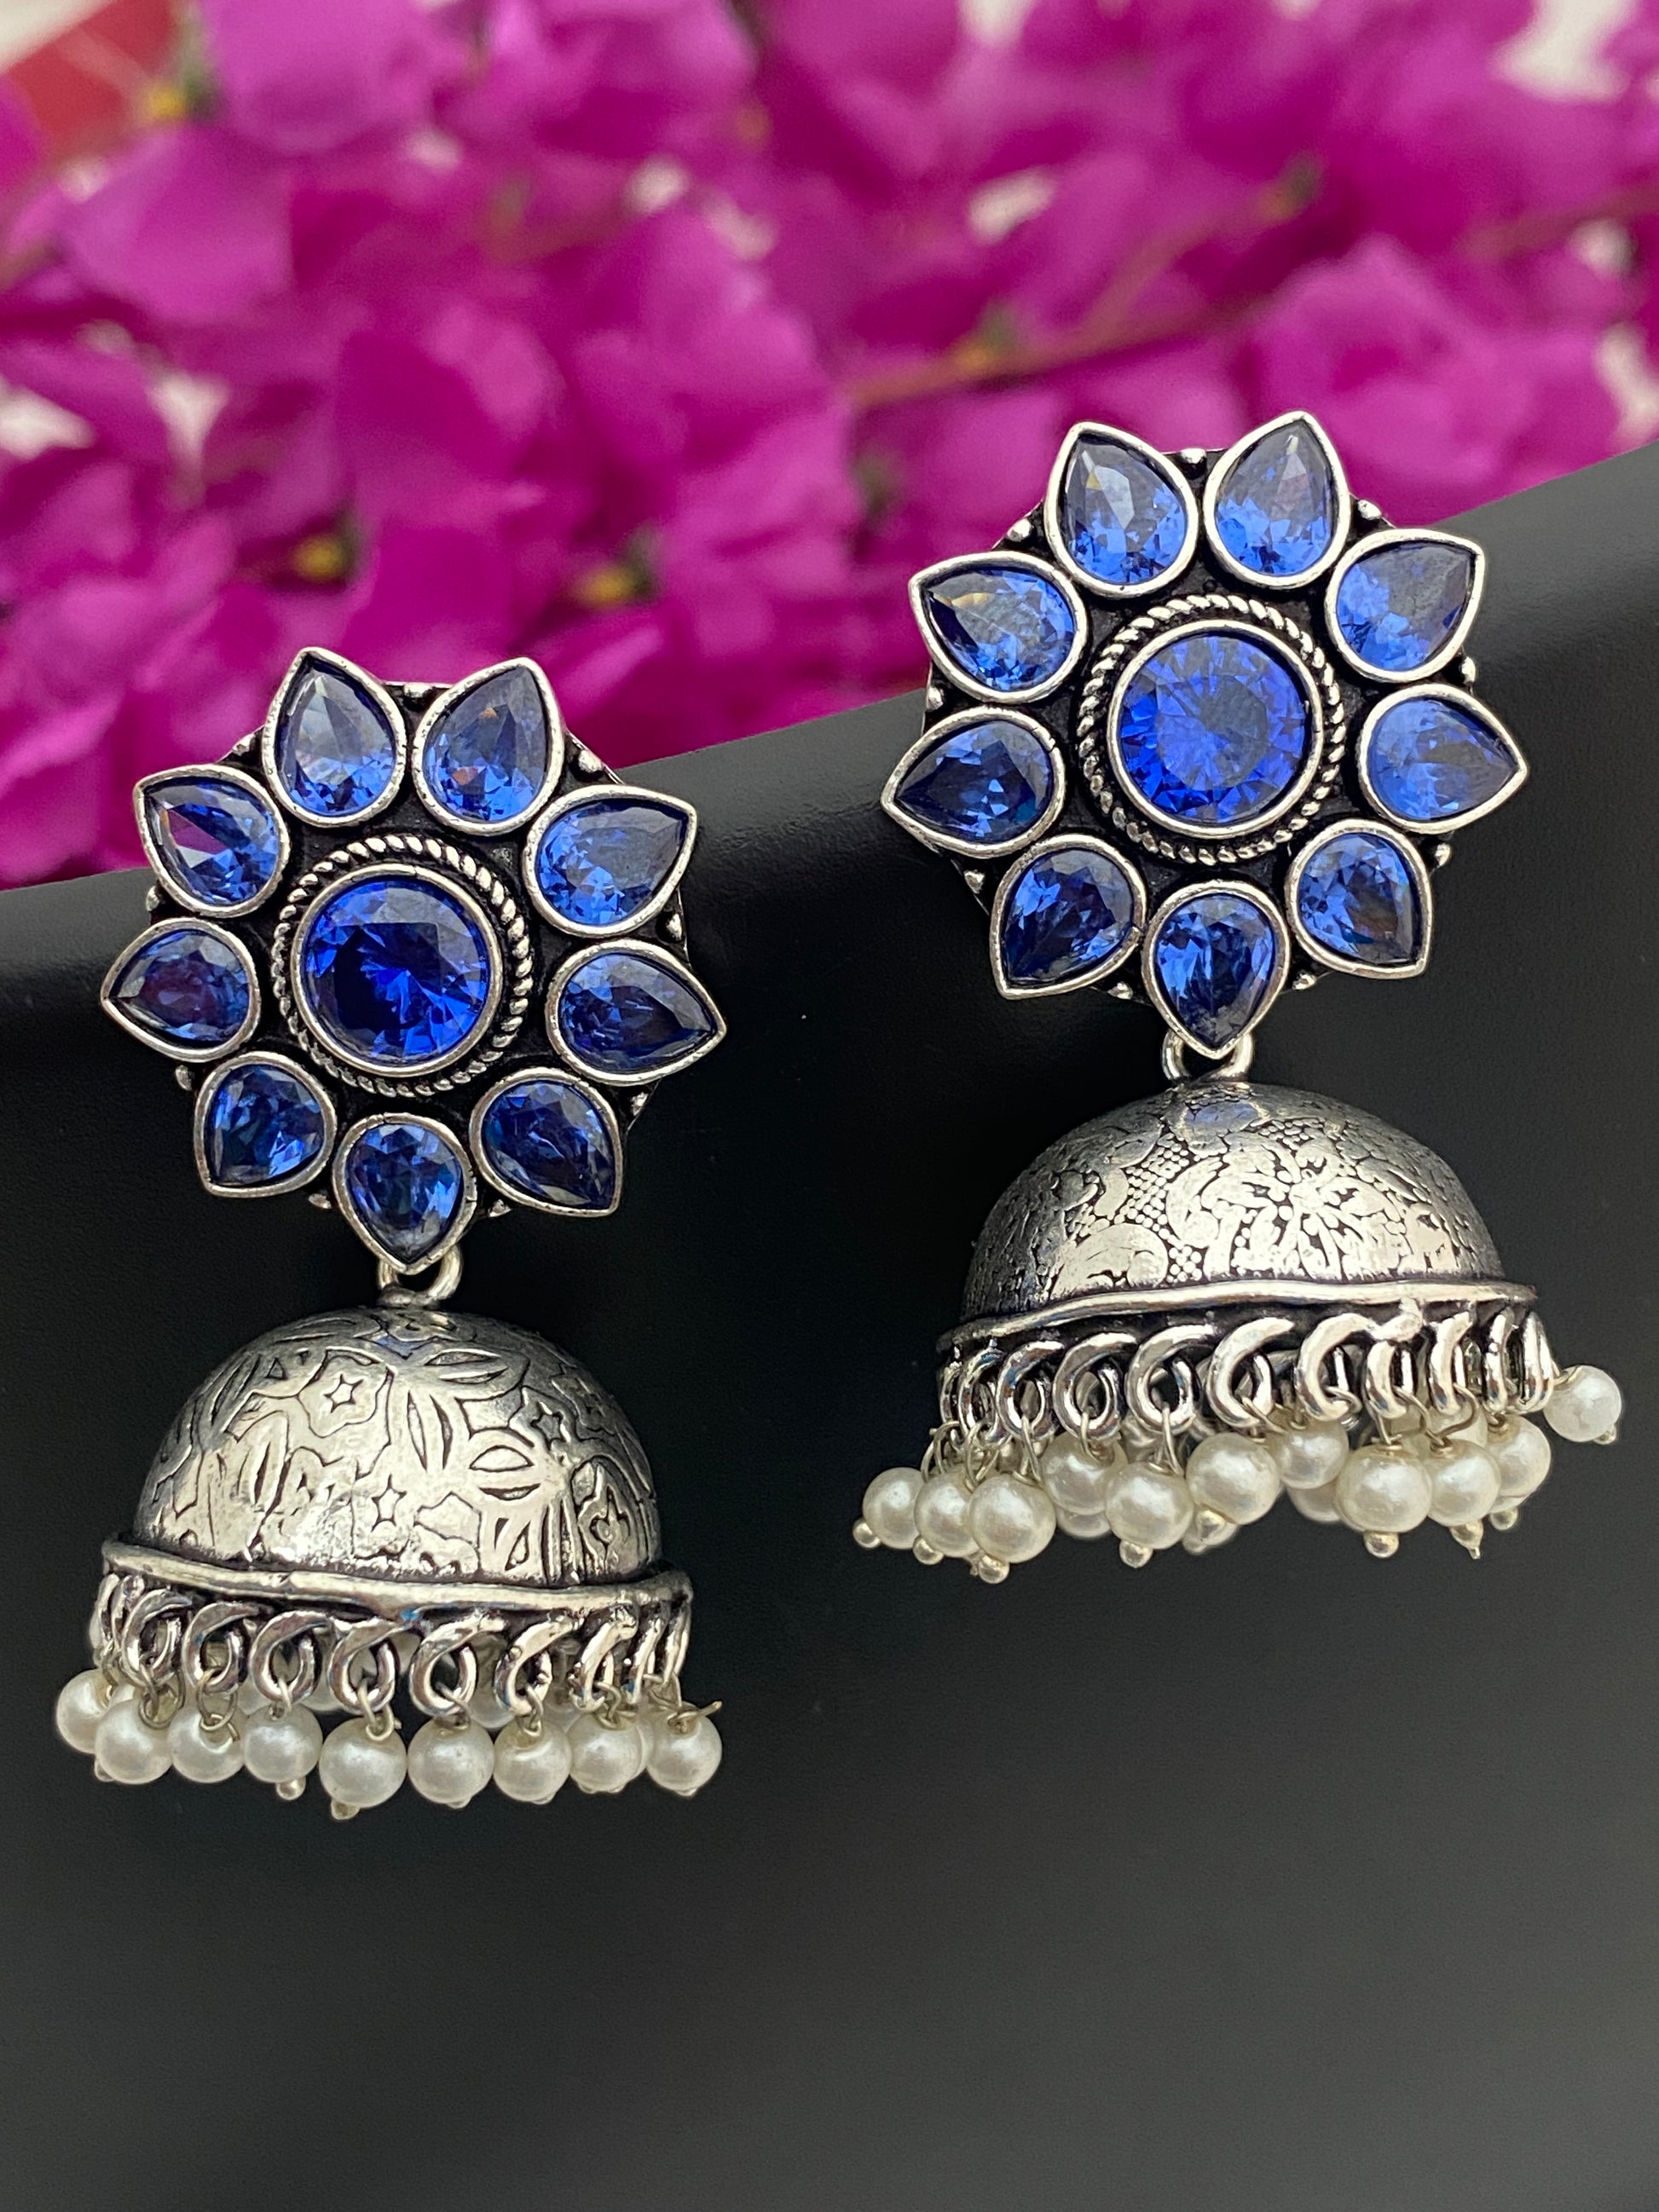 Gorgeous Blue Stone Beaded Floral Designed Silver Toned Oxidized Jhumka Earrings With Pearl Drops